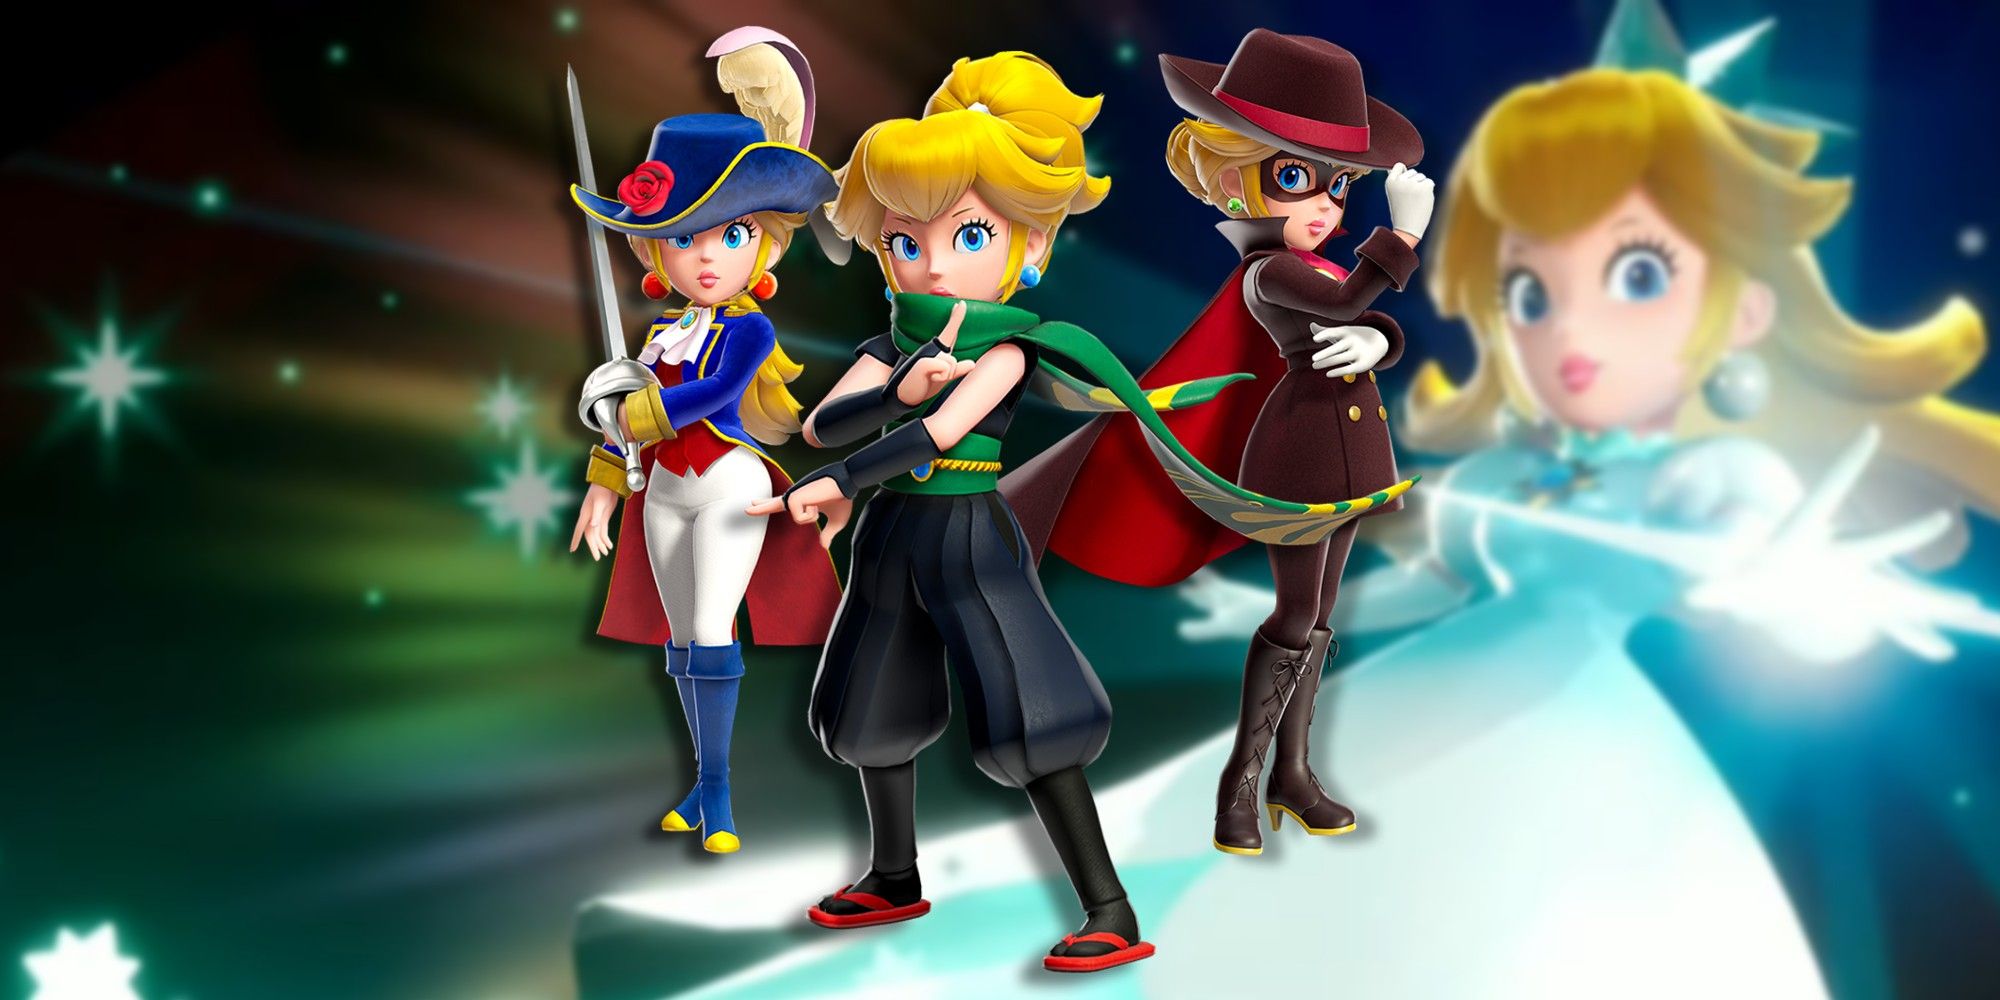 Princes Peach wearing different outfits from her Showtime game